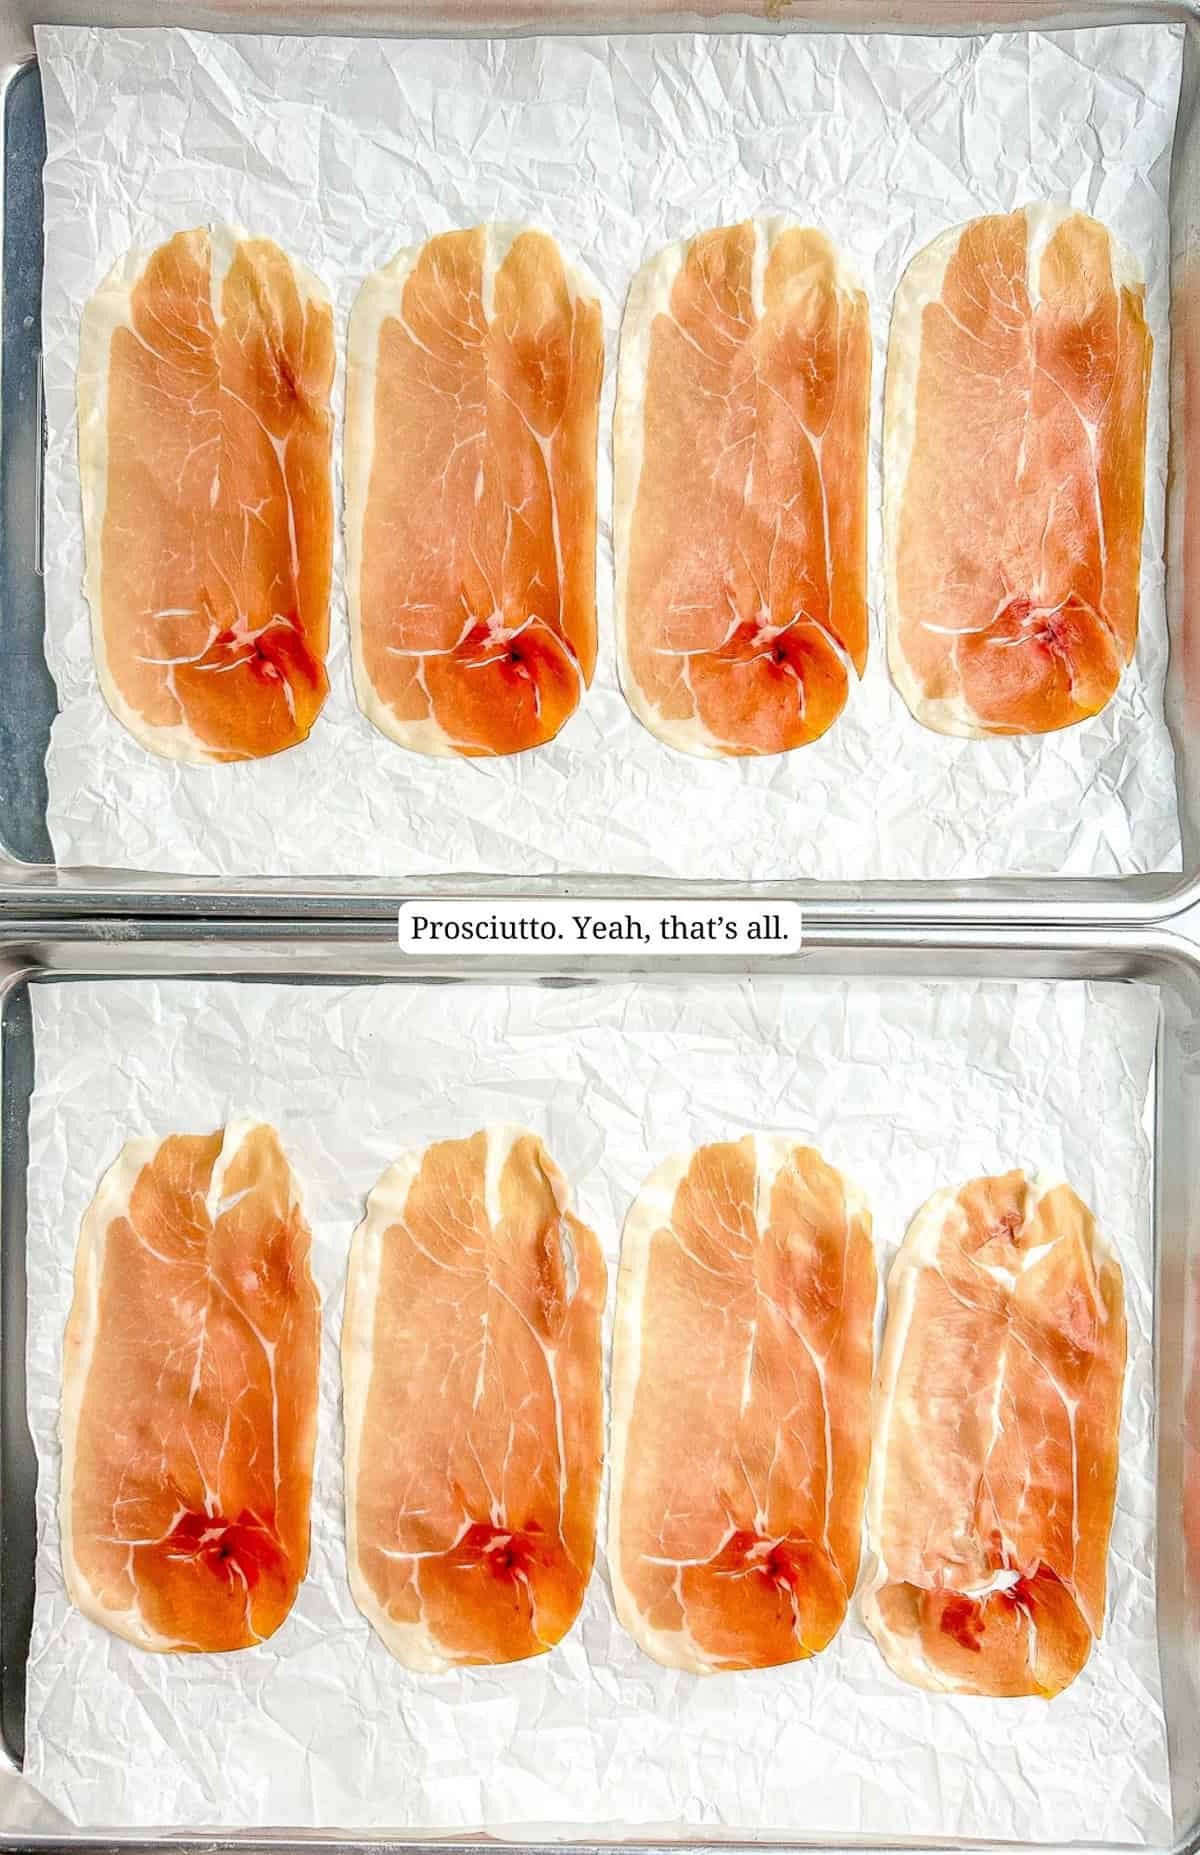 Two sheet trays, each containing 4 slices of raw prosciutto.